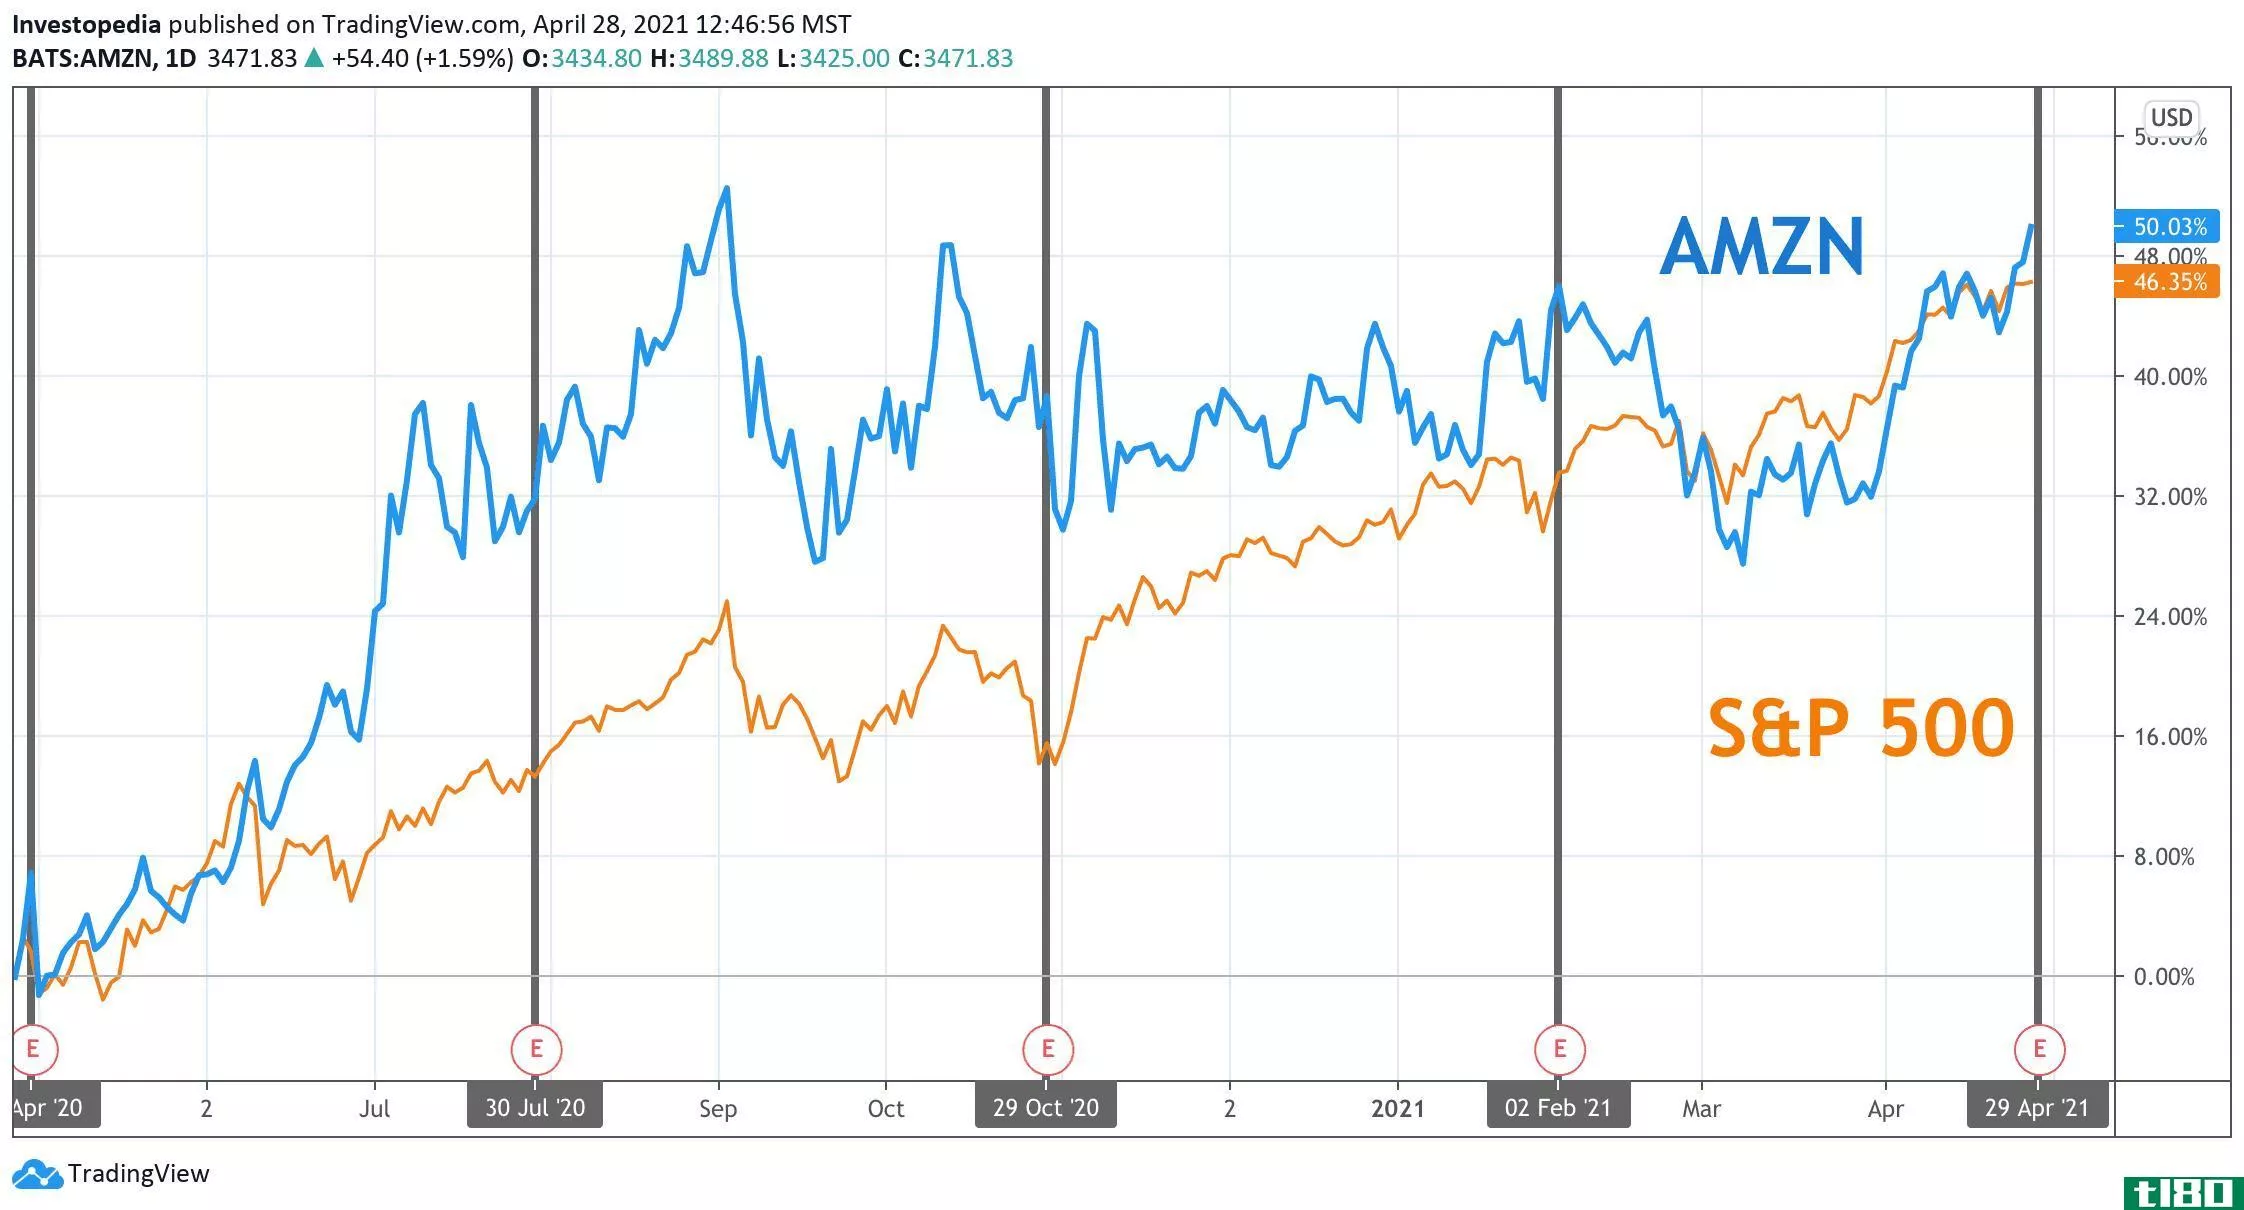 One Year Total Return for S&P 500 and Amazon